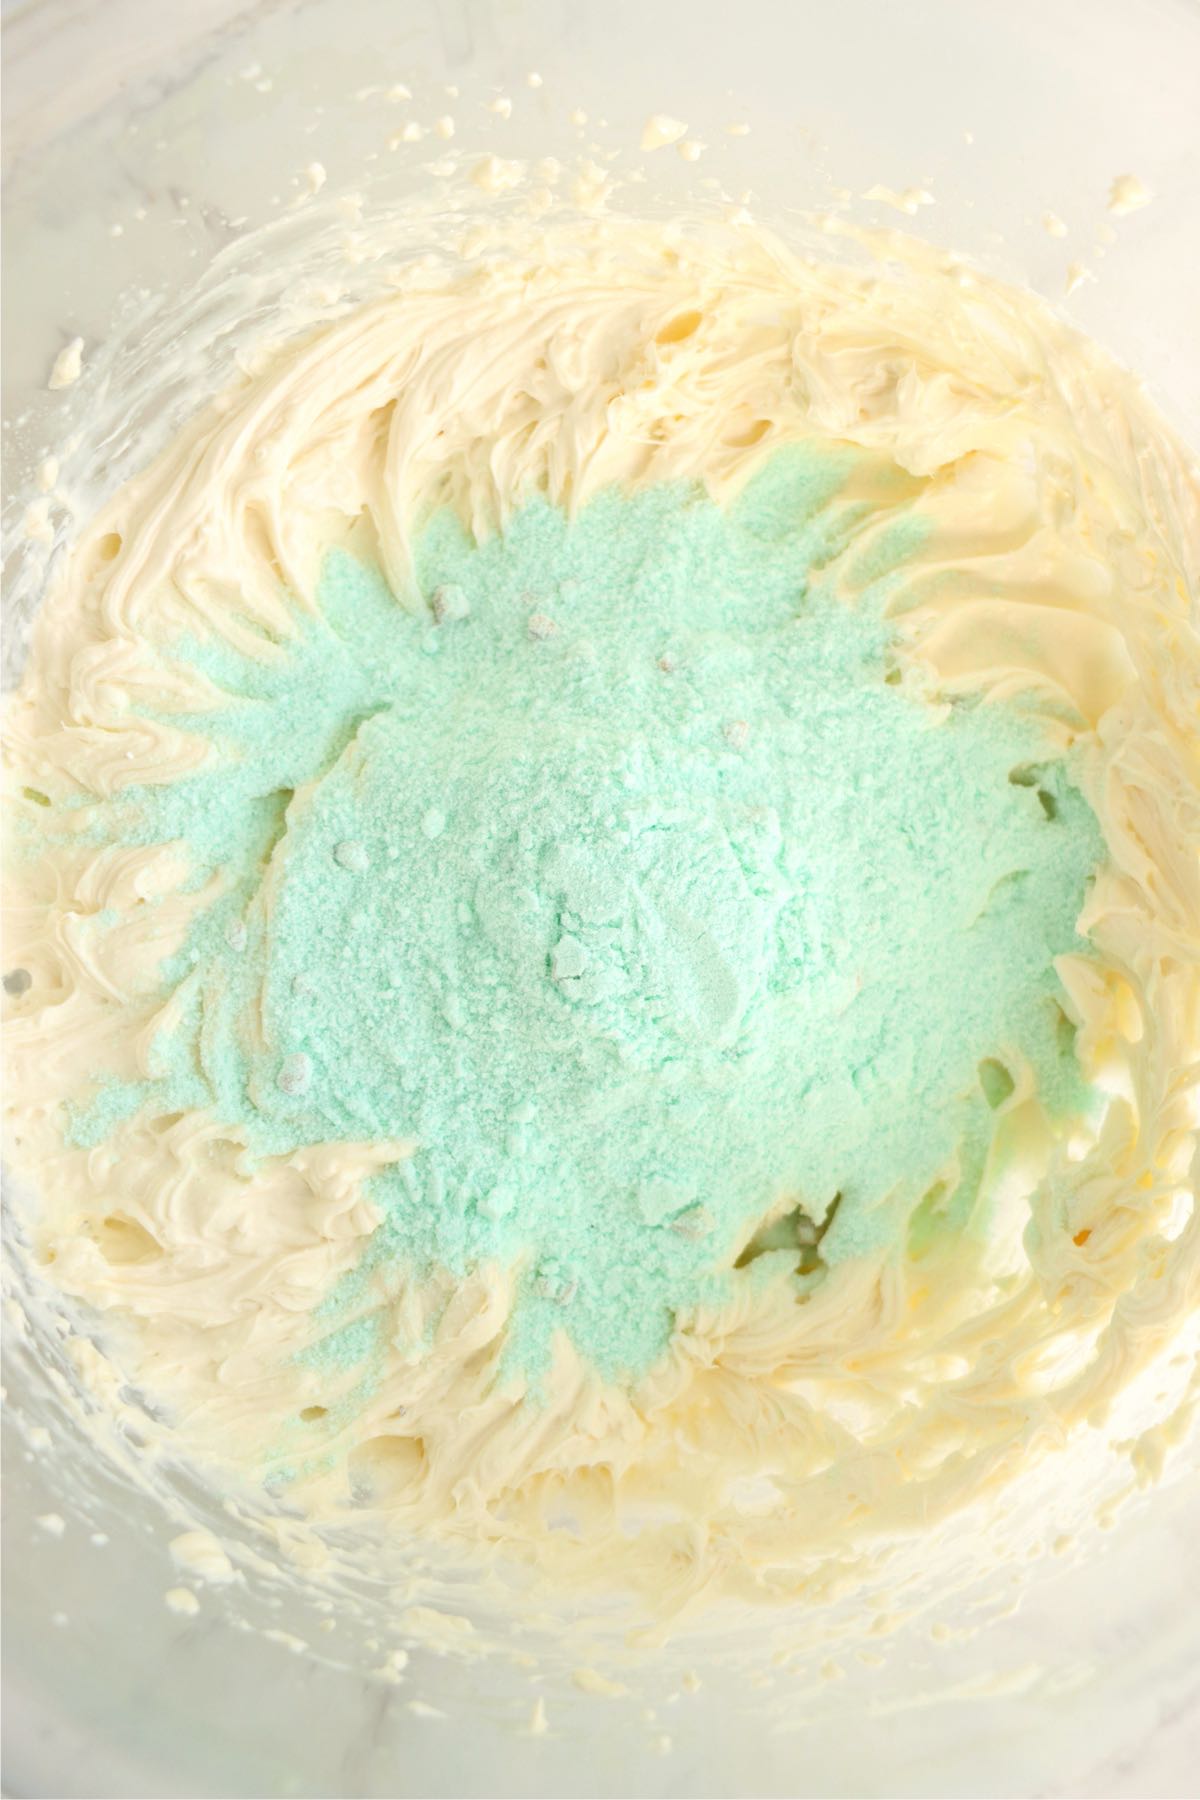 A mixture of whipped cream cheese and pistachio pudding mix in a bowl